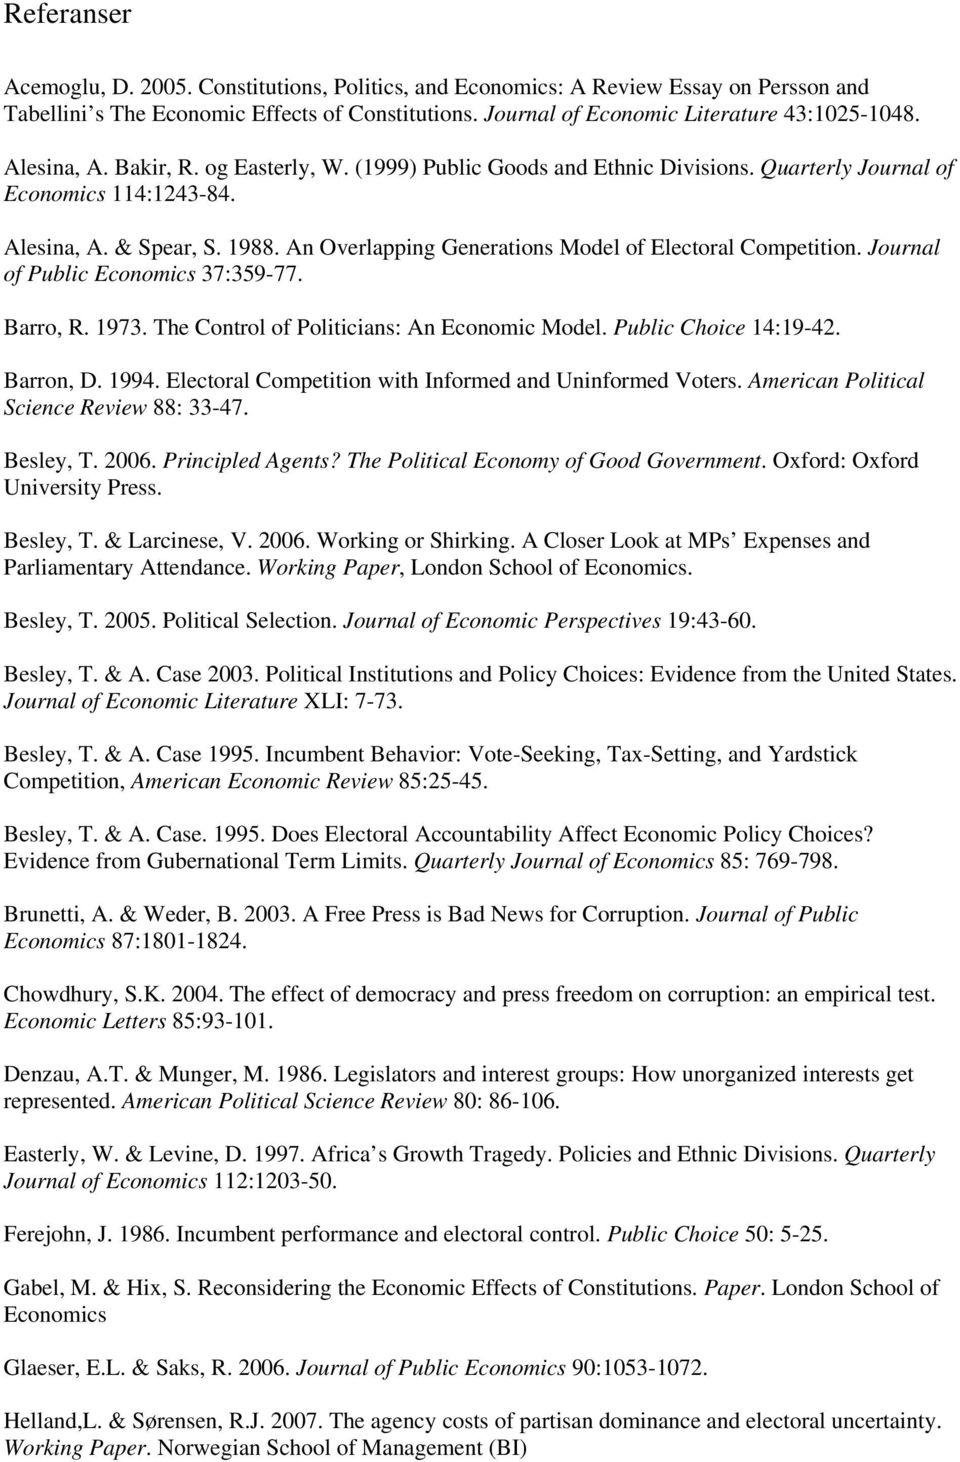 An Overlapping Generations Model of Electoral Competition. Journal of Public Economics 37:359-77. Barro, R. 1973. The Control of Politicians: An Economic Model. Public Choice 14:19-42. Barron, D.